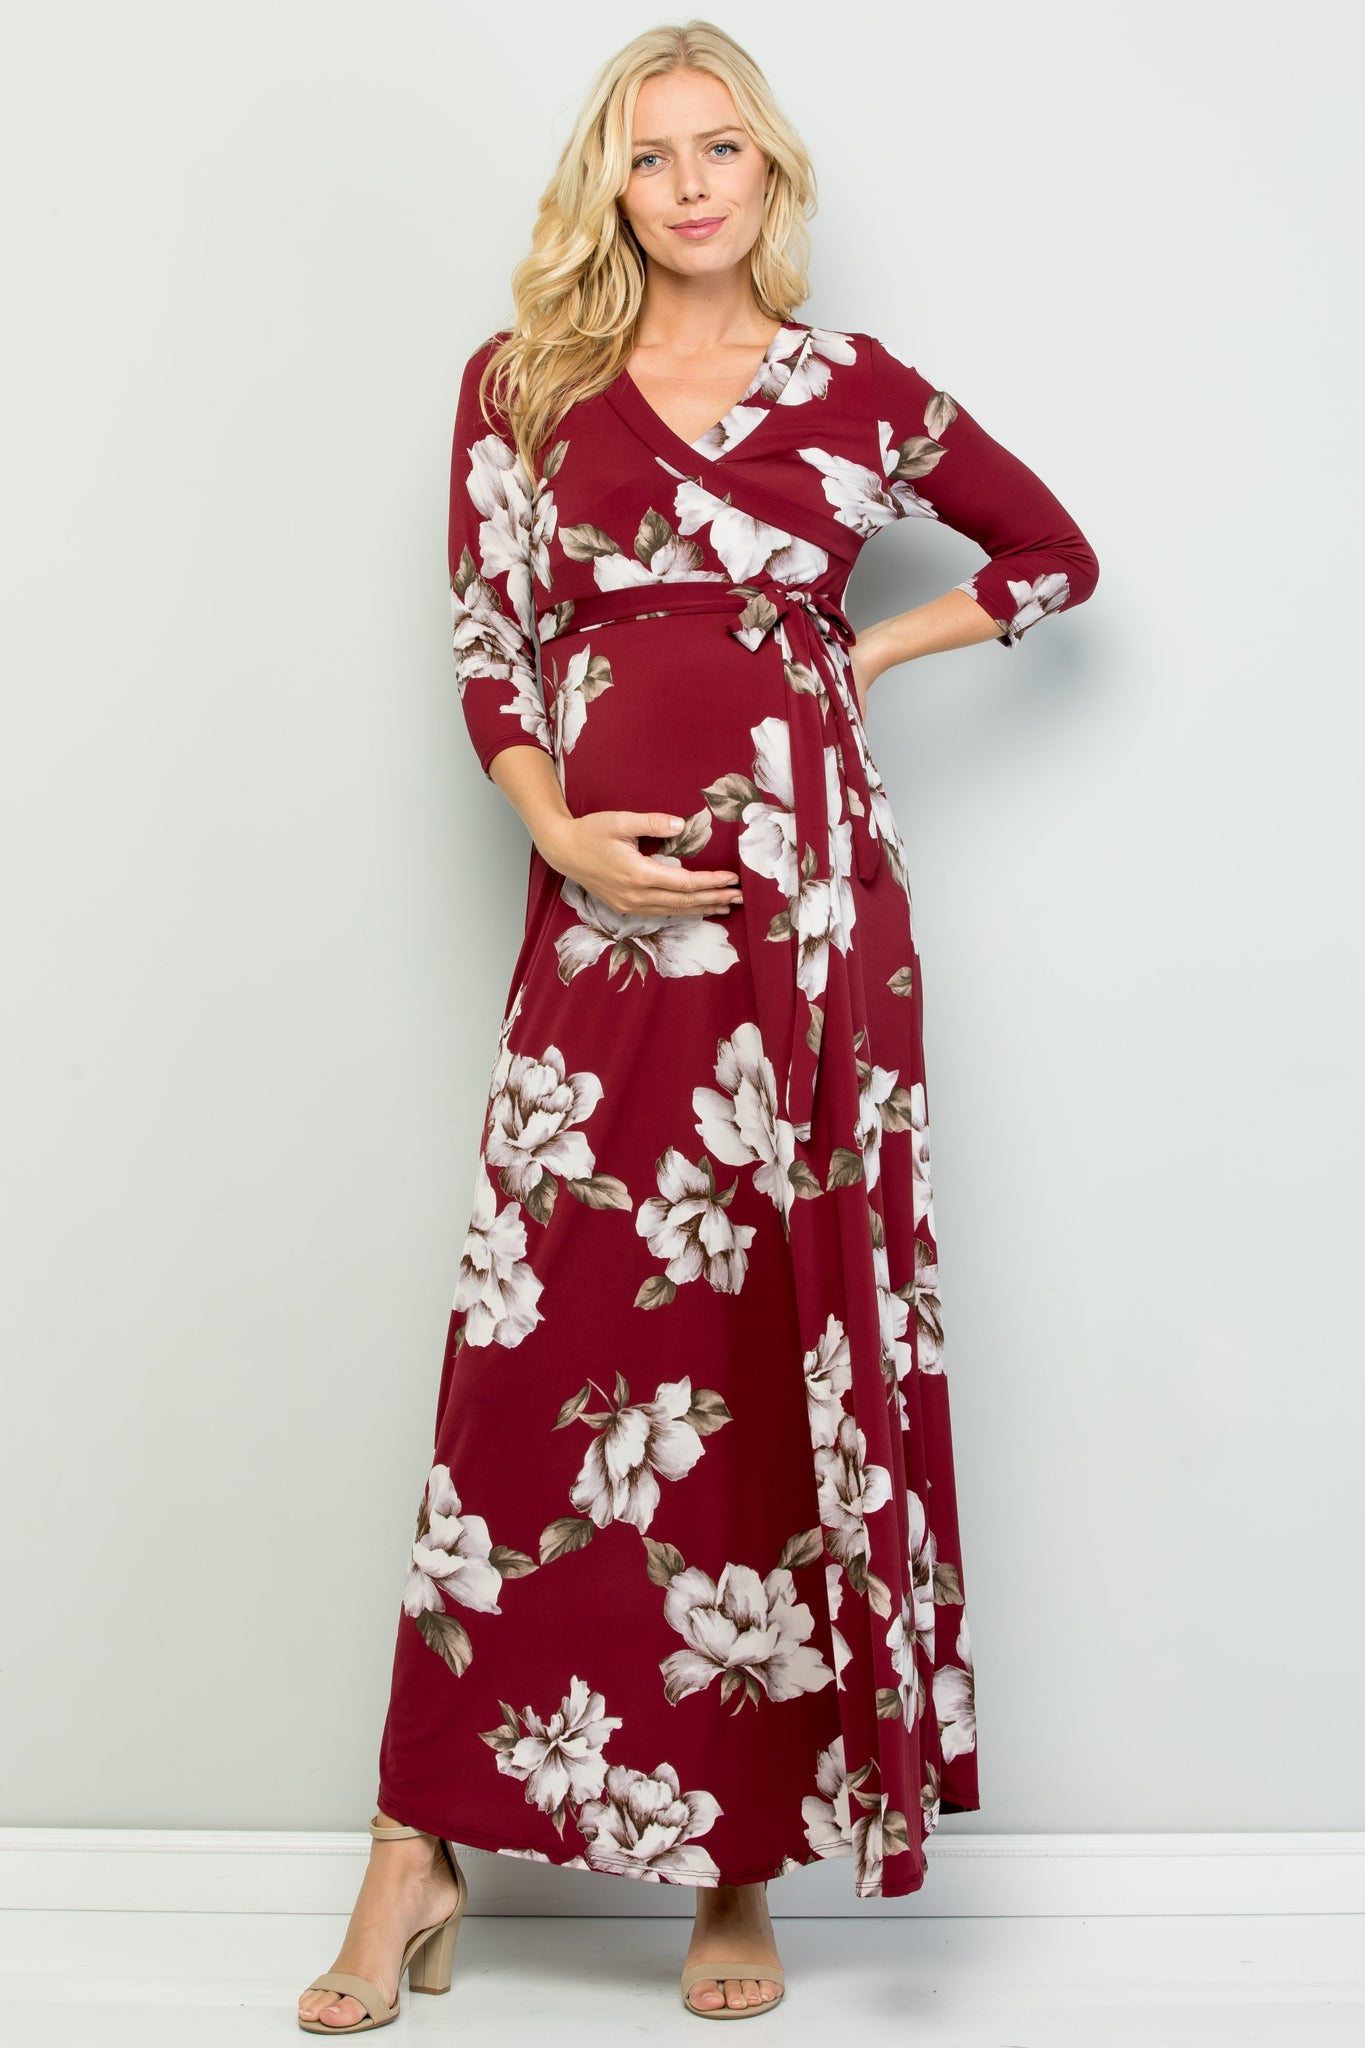 maternity pregnancy baby shower floral relaxed quarter sleeve surplice spring summer cocktail maxi dress